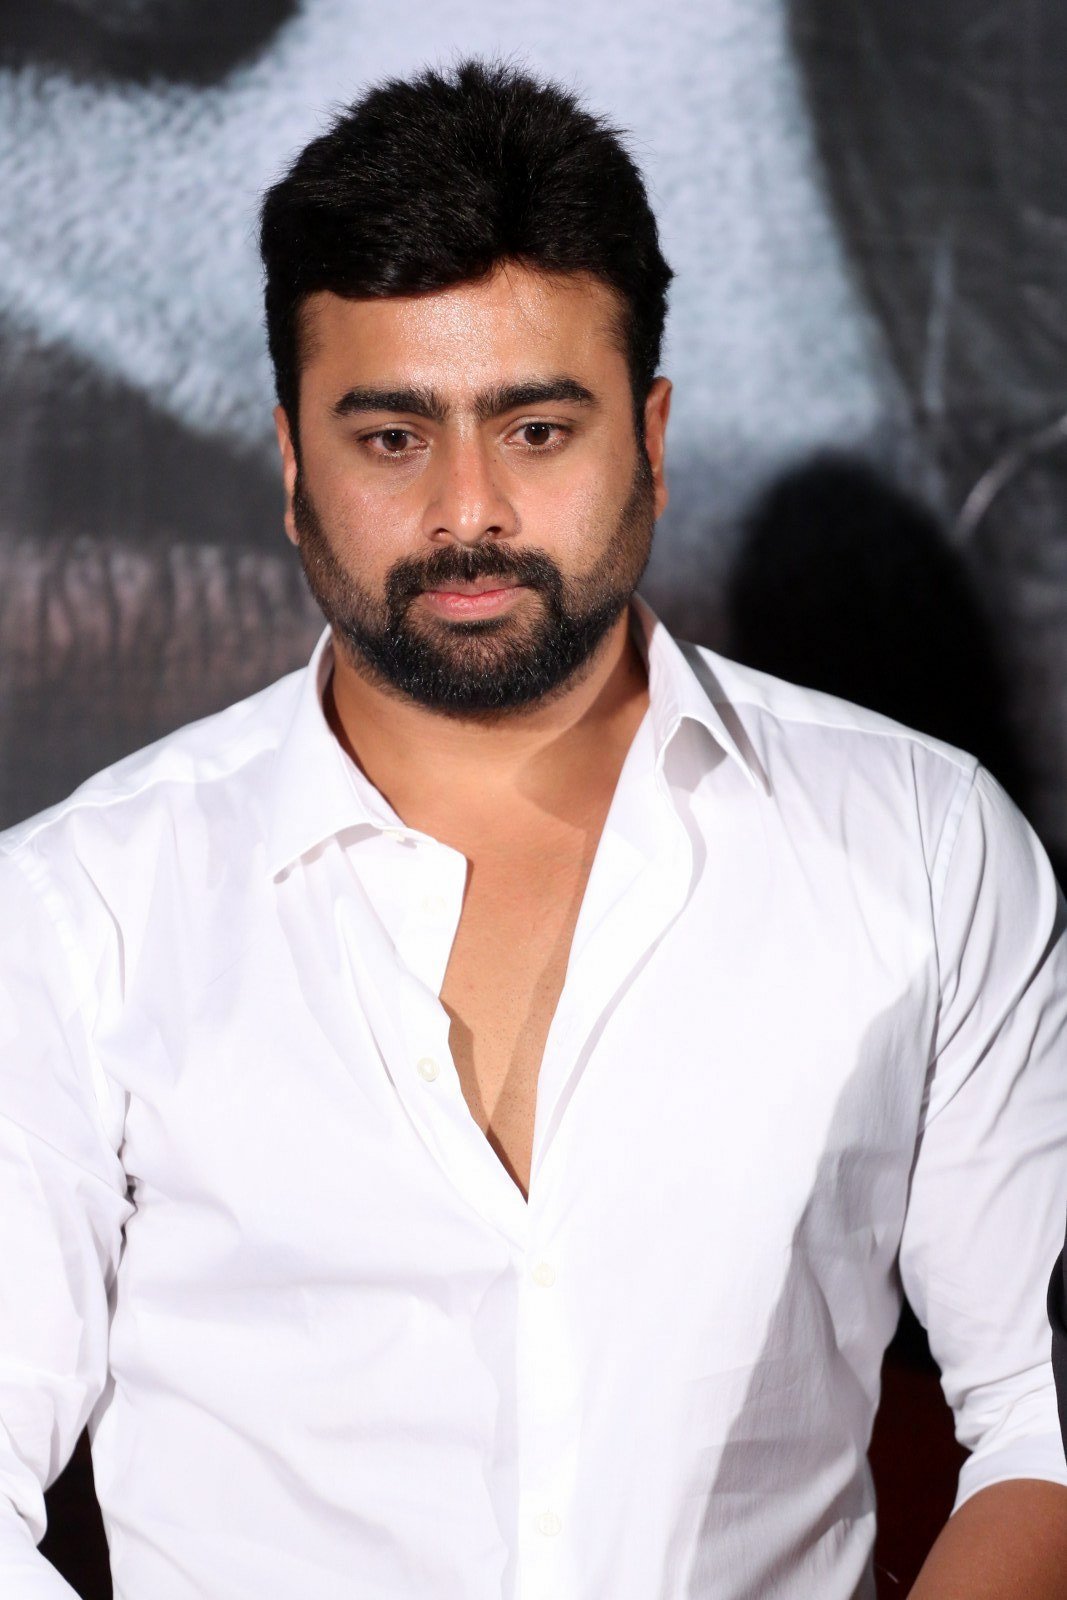 Nara Rohit - Maya Mall Pre Release Function | Picture 1518975